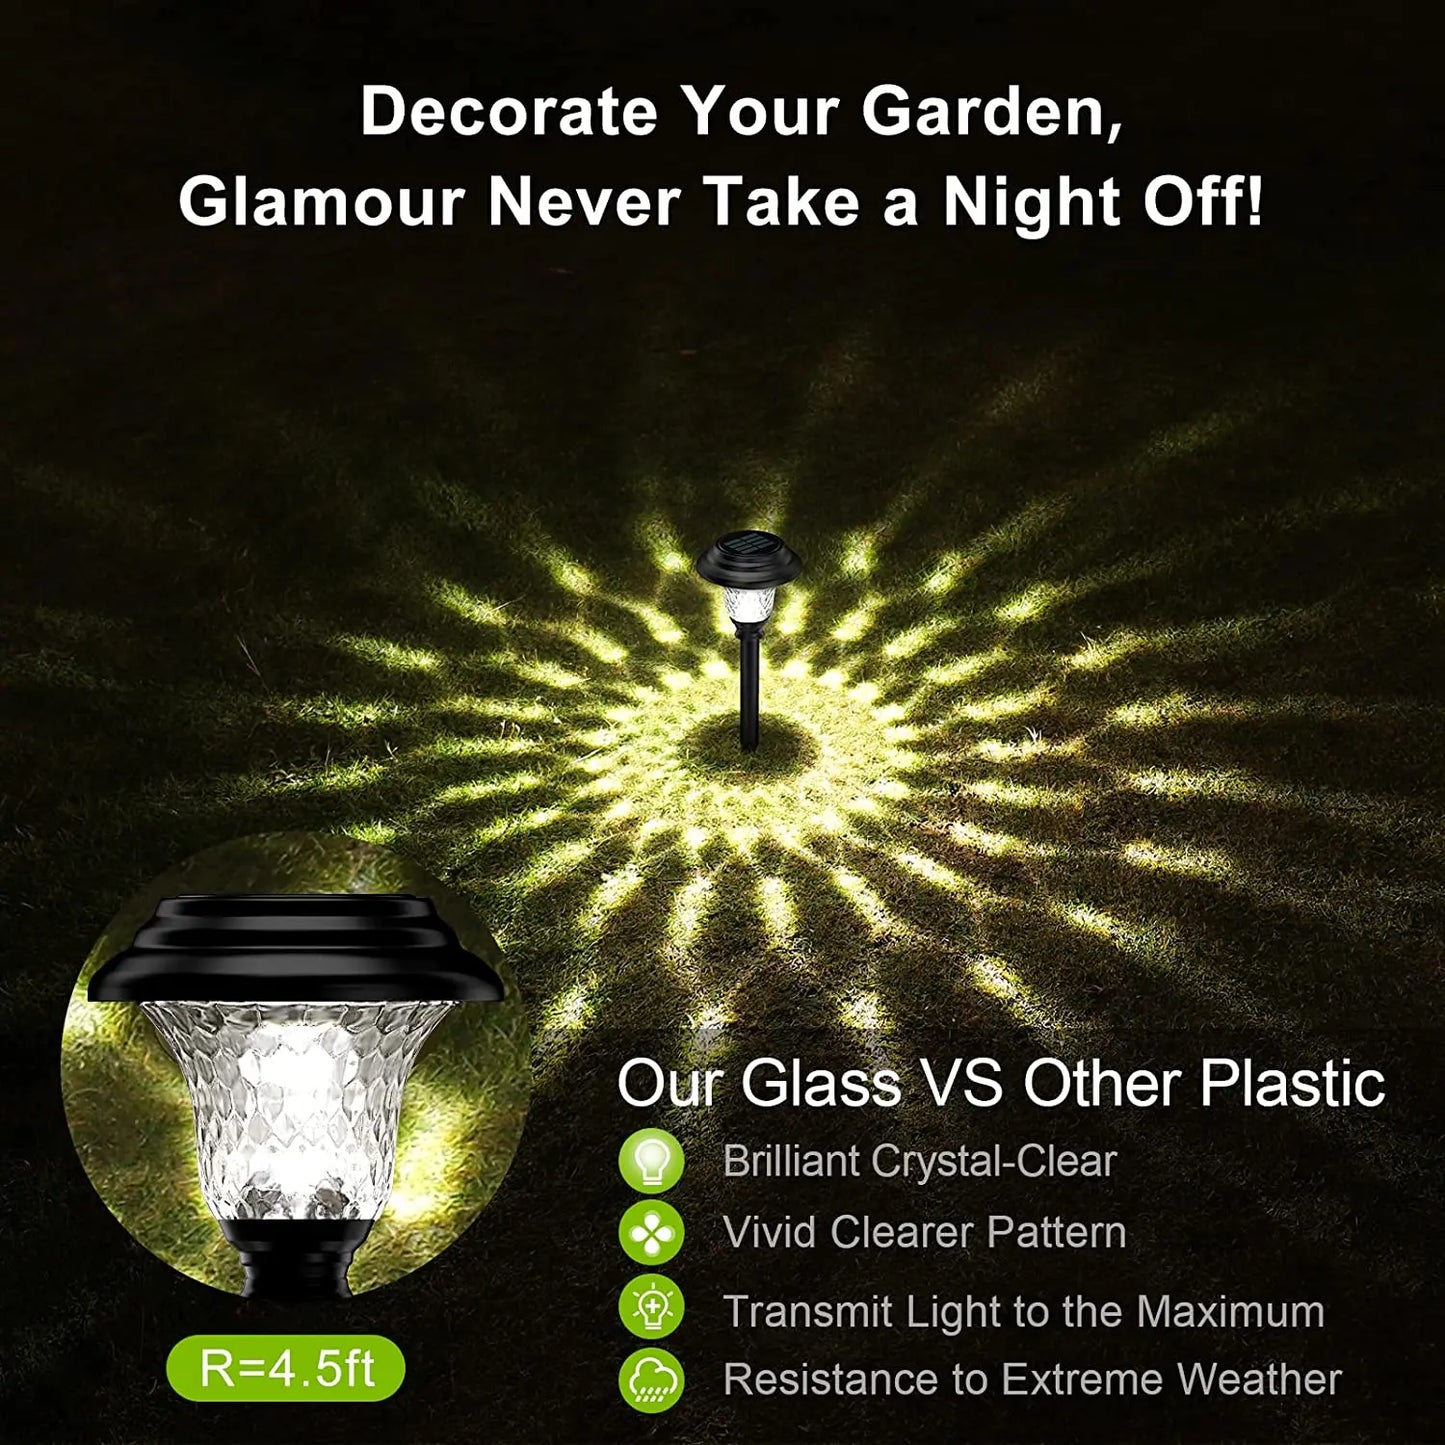 Solar Pathway Lights Outdoor Waterproof Bright LED Landscape Lamp